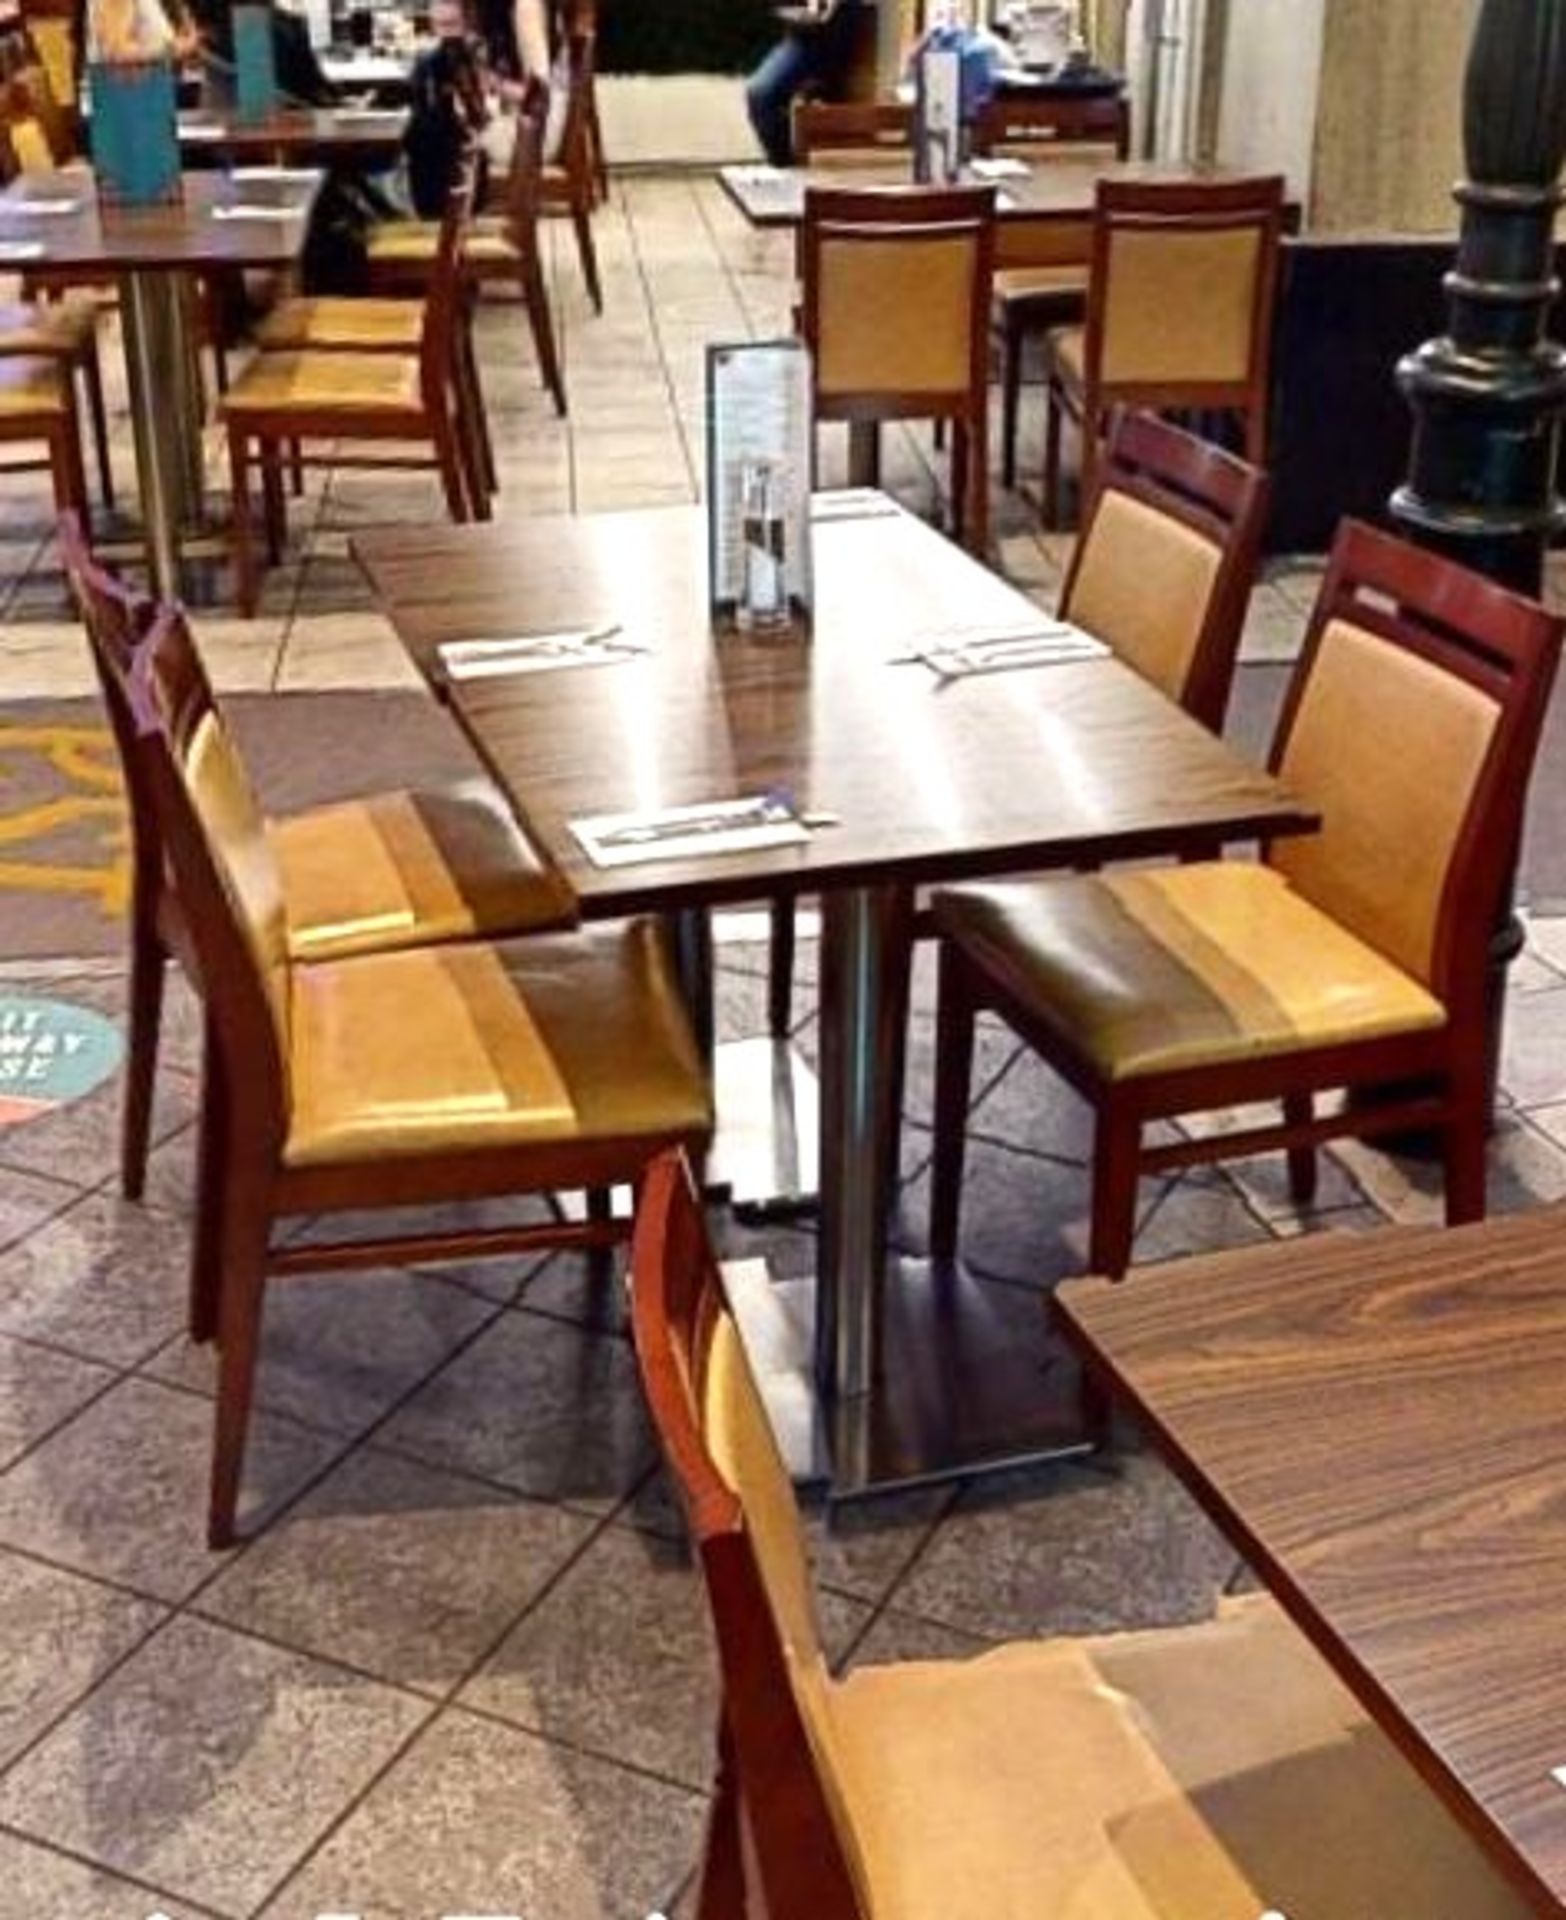 8 x Two Person Restaurant Dining Tables Featuring Chrome Pedestals and Tops With a Walnut Finish - - Image 6 of 7